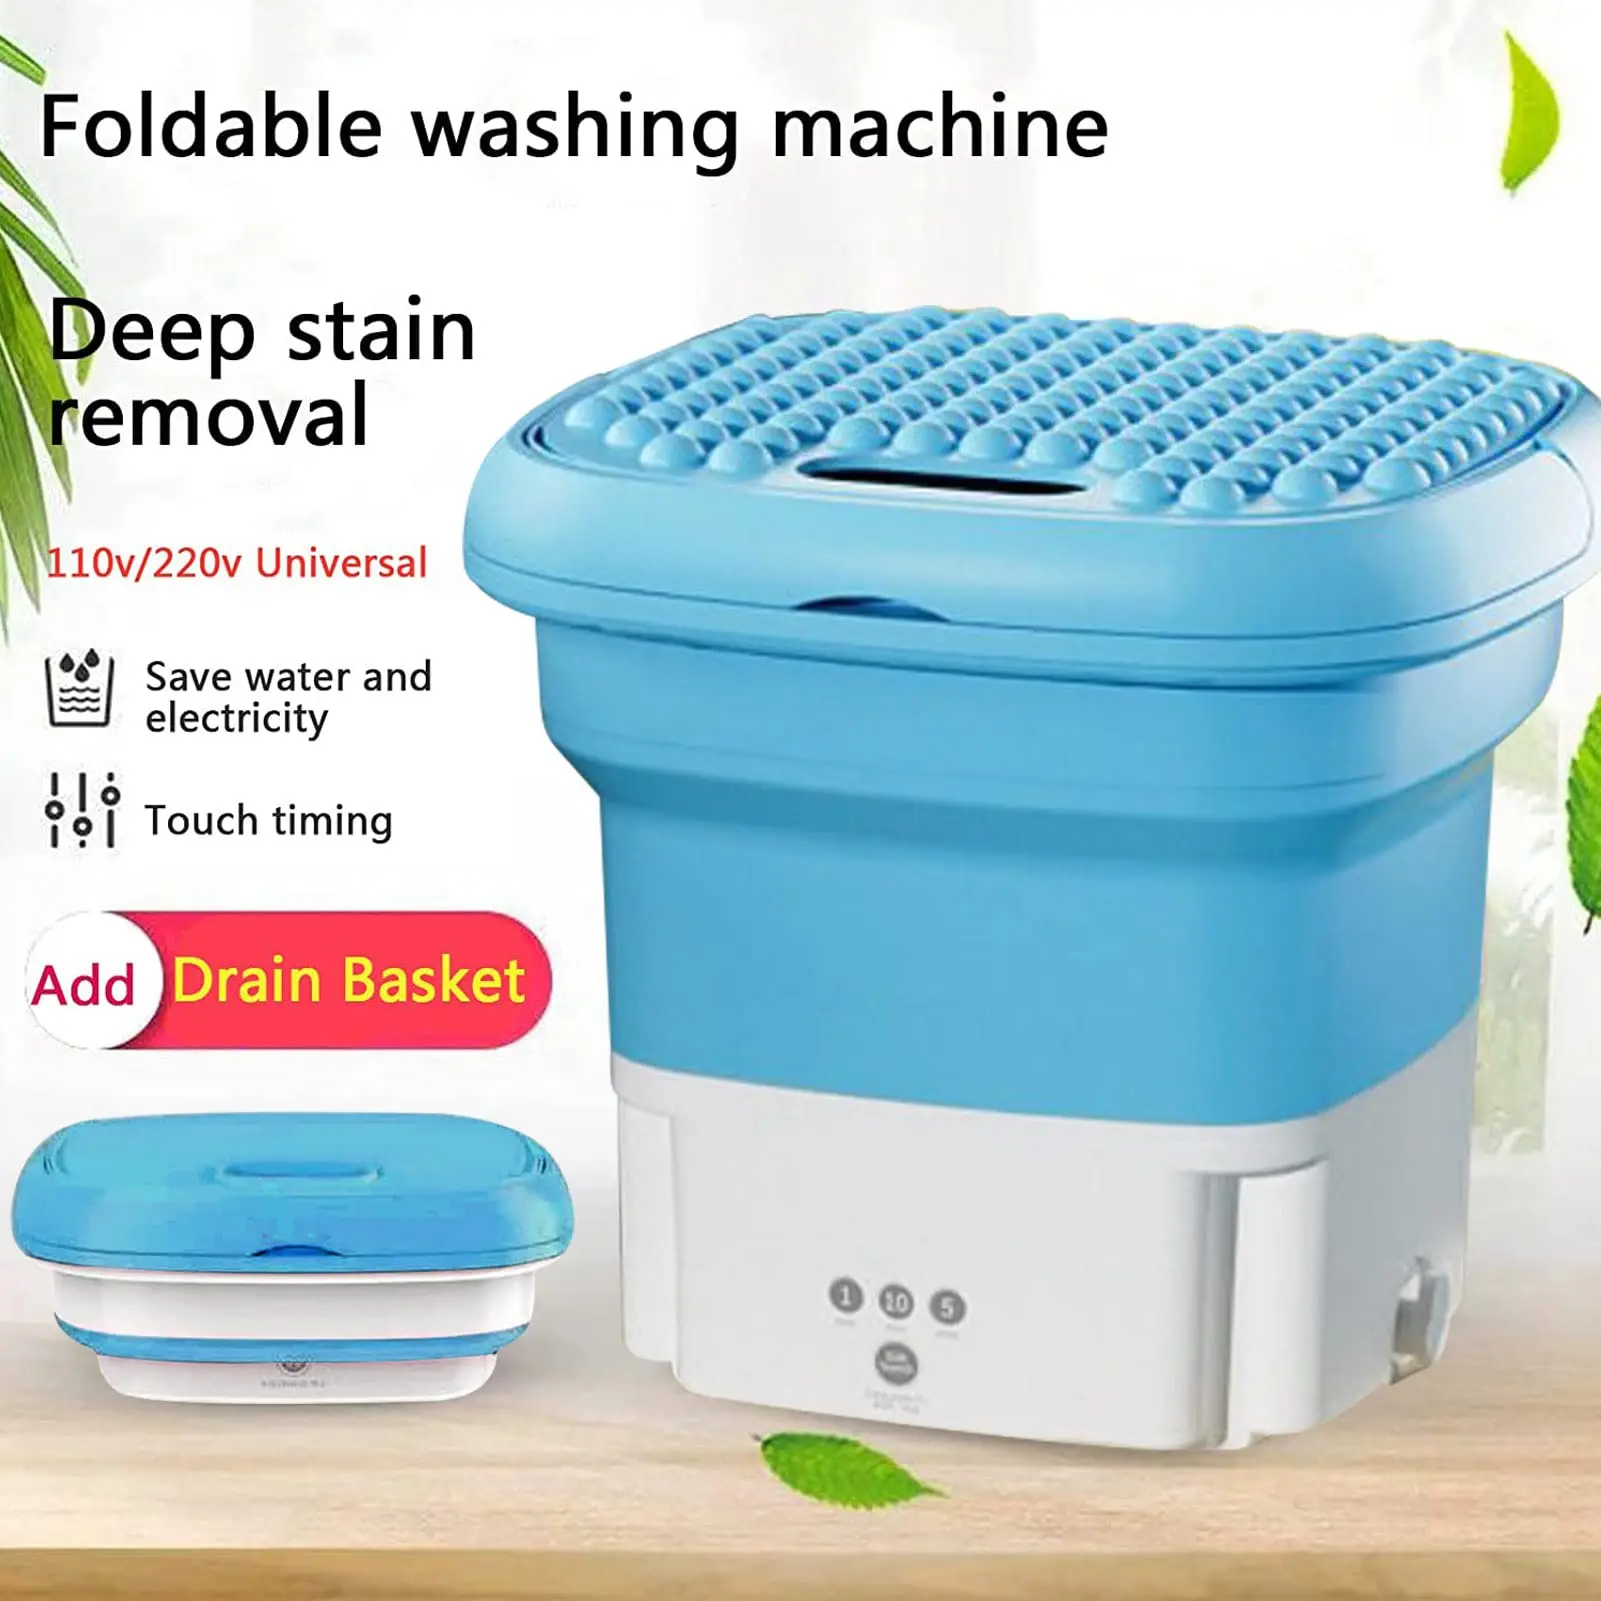 Folding Portable Washing Machine With Dryer Bucket for Clothes Socks Und... - $65.12